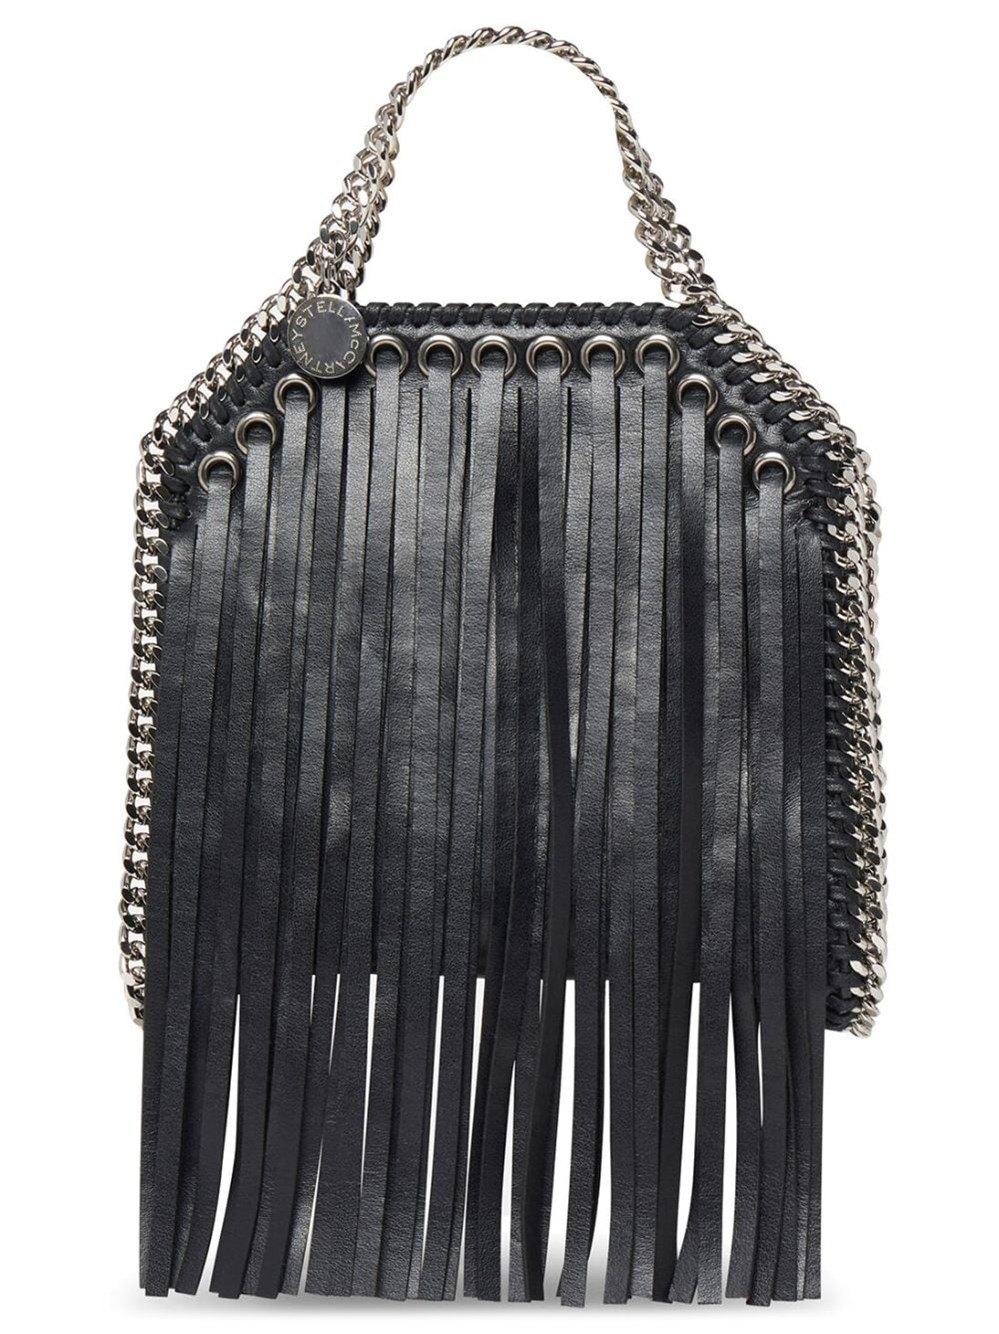 STELLA MCCARTNEY MICRO FALABELLA TOTE BAG WITH FRINGES